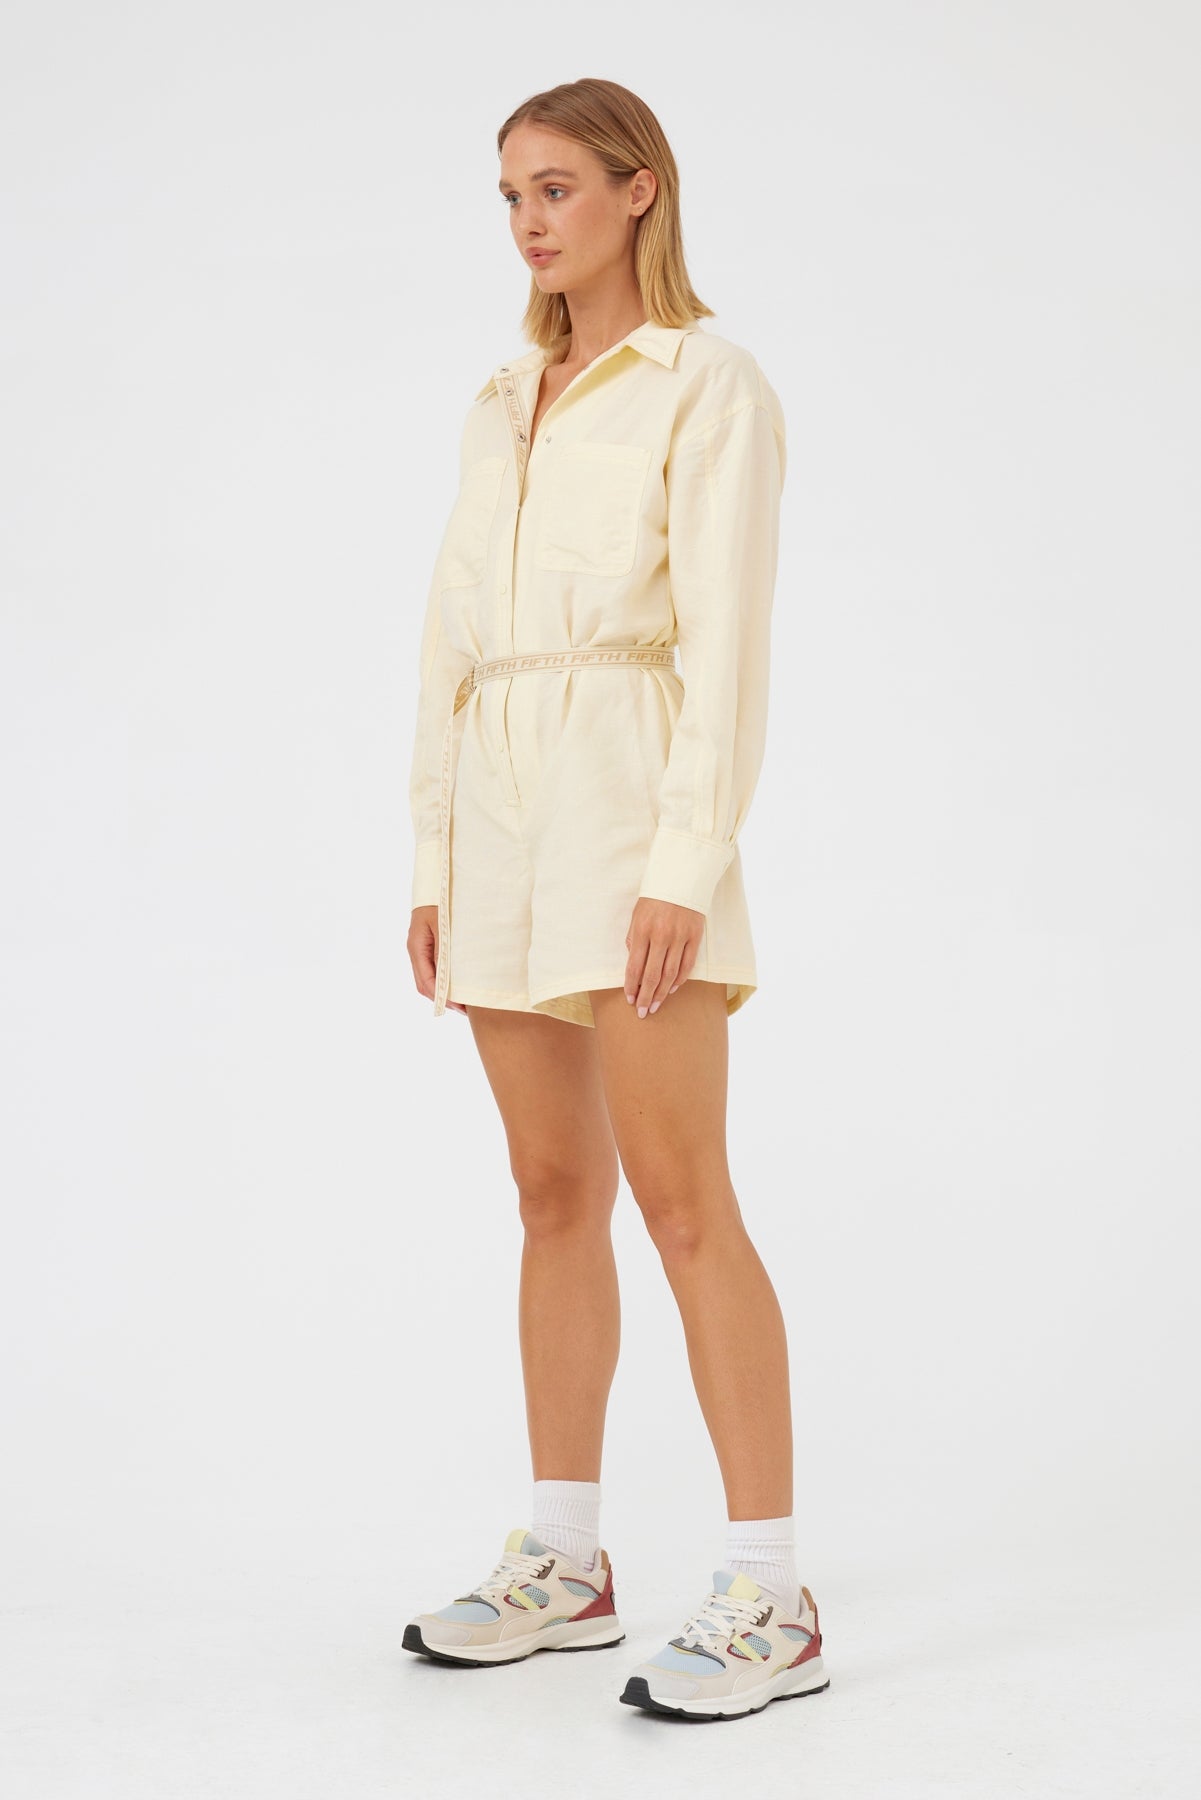 The Fifth Label - Acclaimed Playsuit - Banana